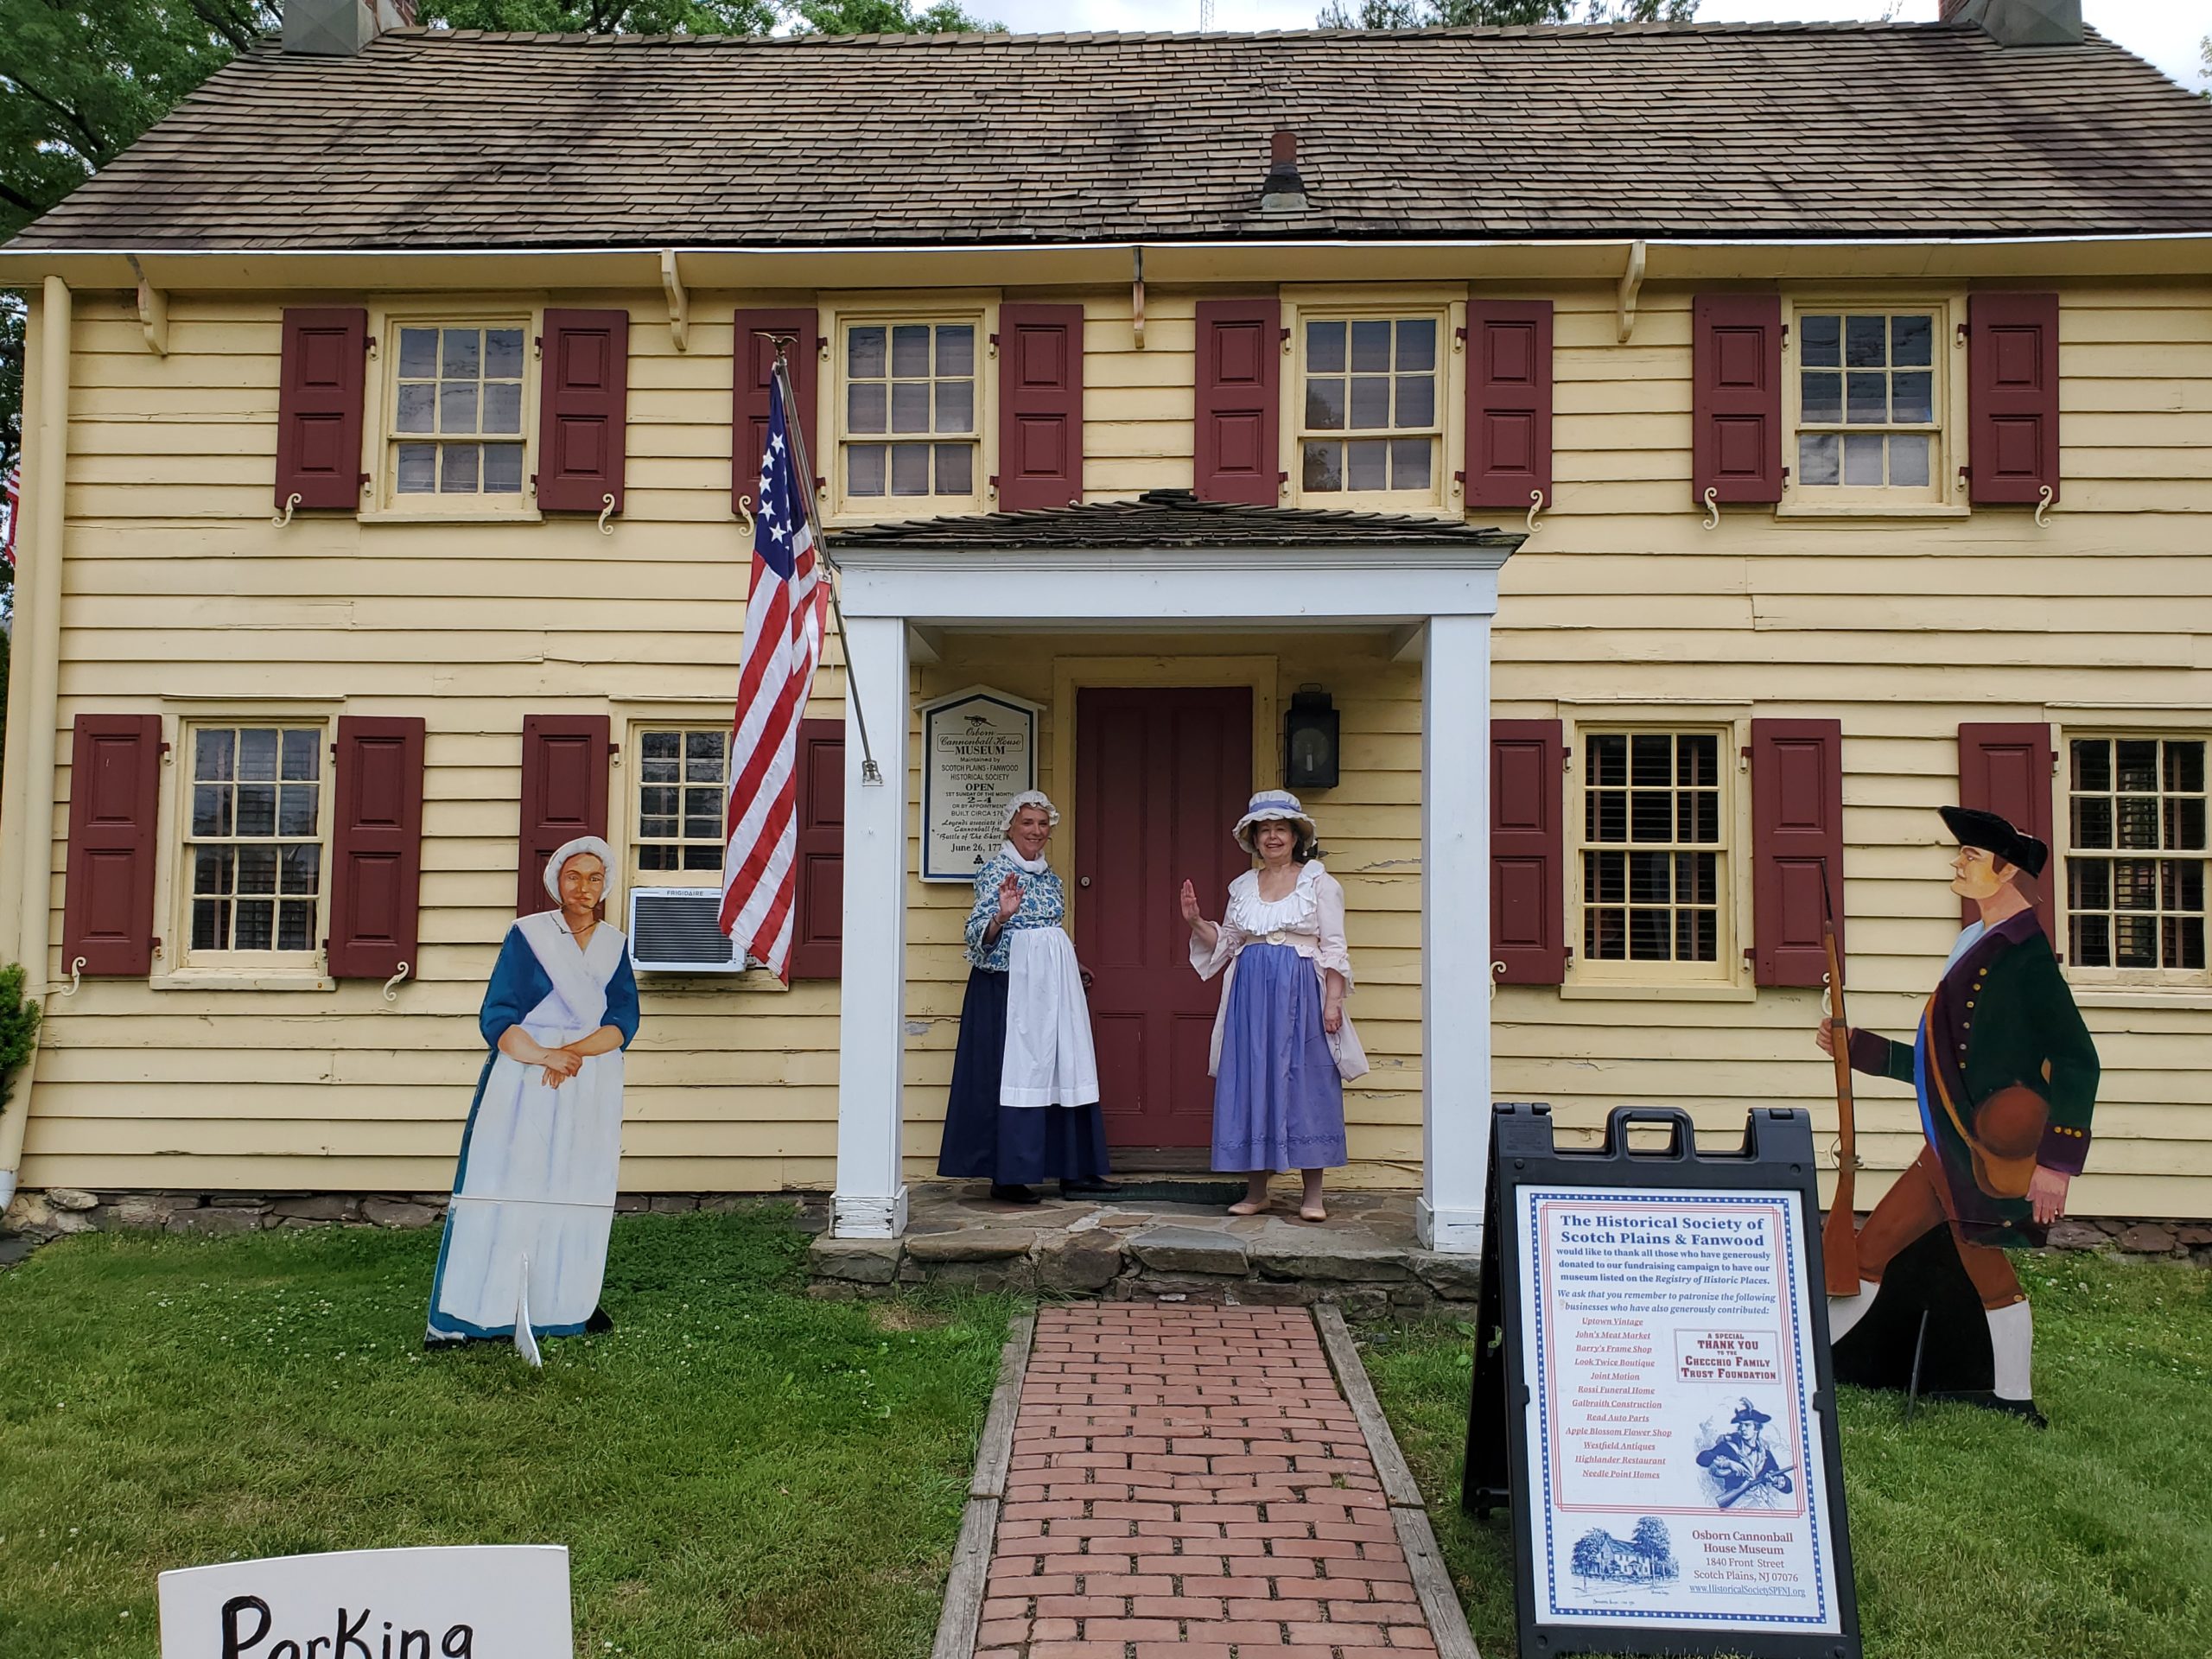 The Osborn Cannonball House Museum Front with two ladies in colonial dress welcoming visitors.